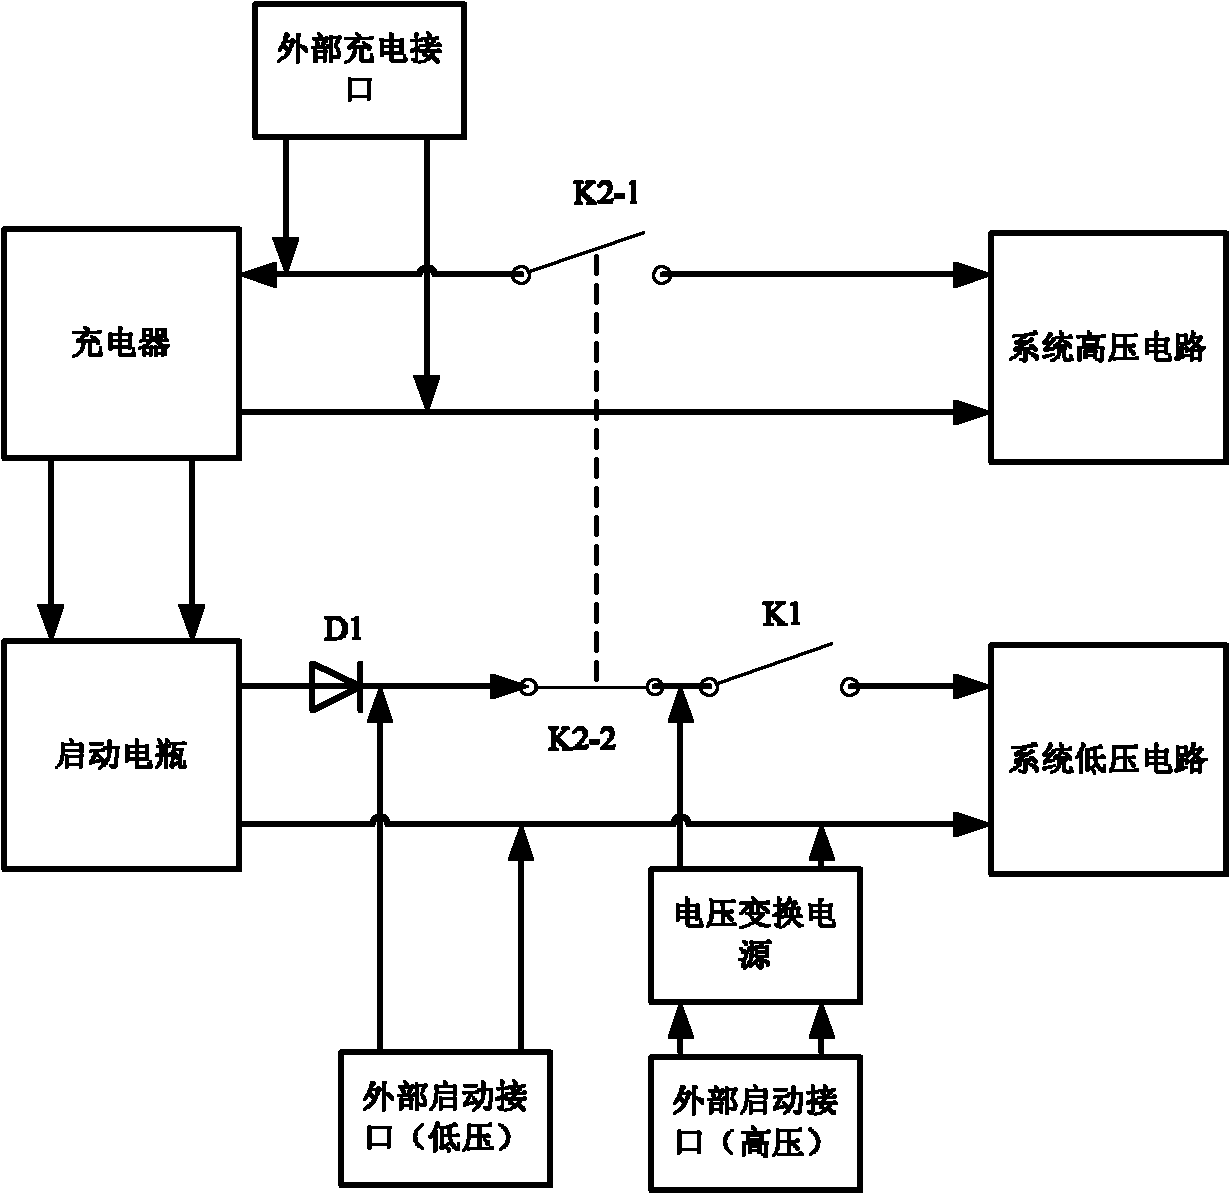 Multimode starting system of fuel cell power supply